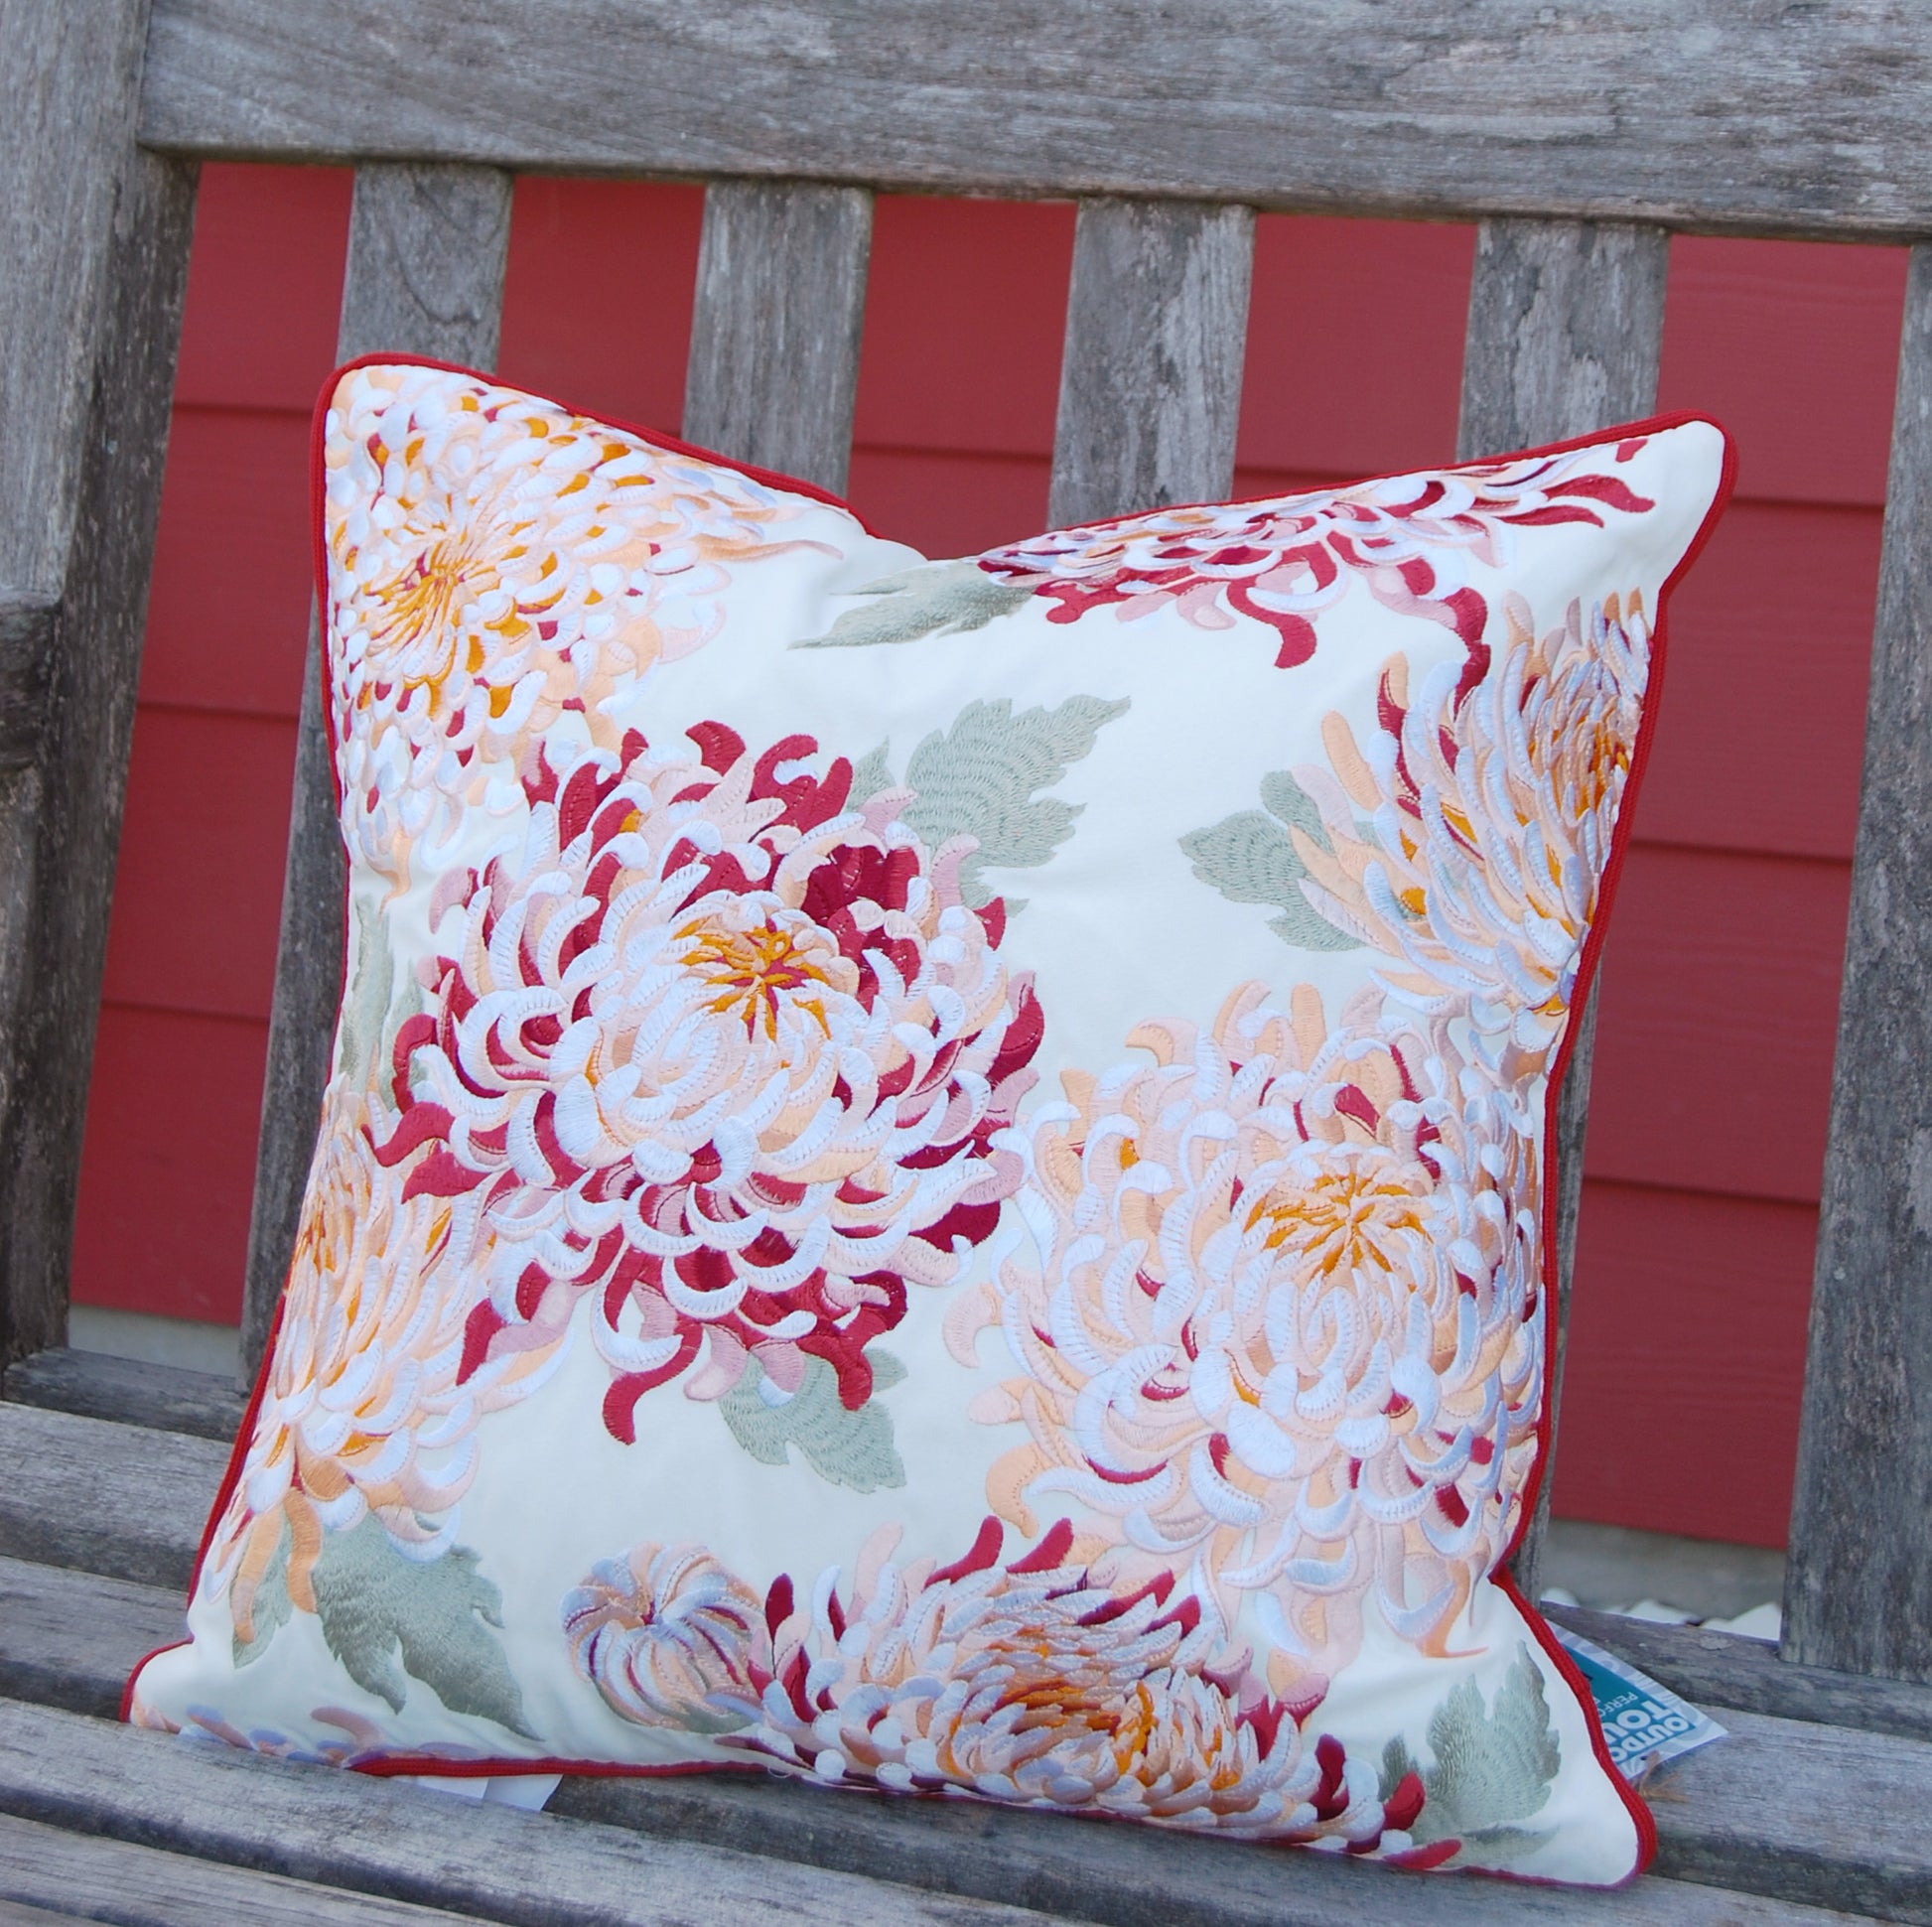 Chrysanthemum pillow styled on an outdoor bench.